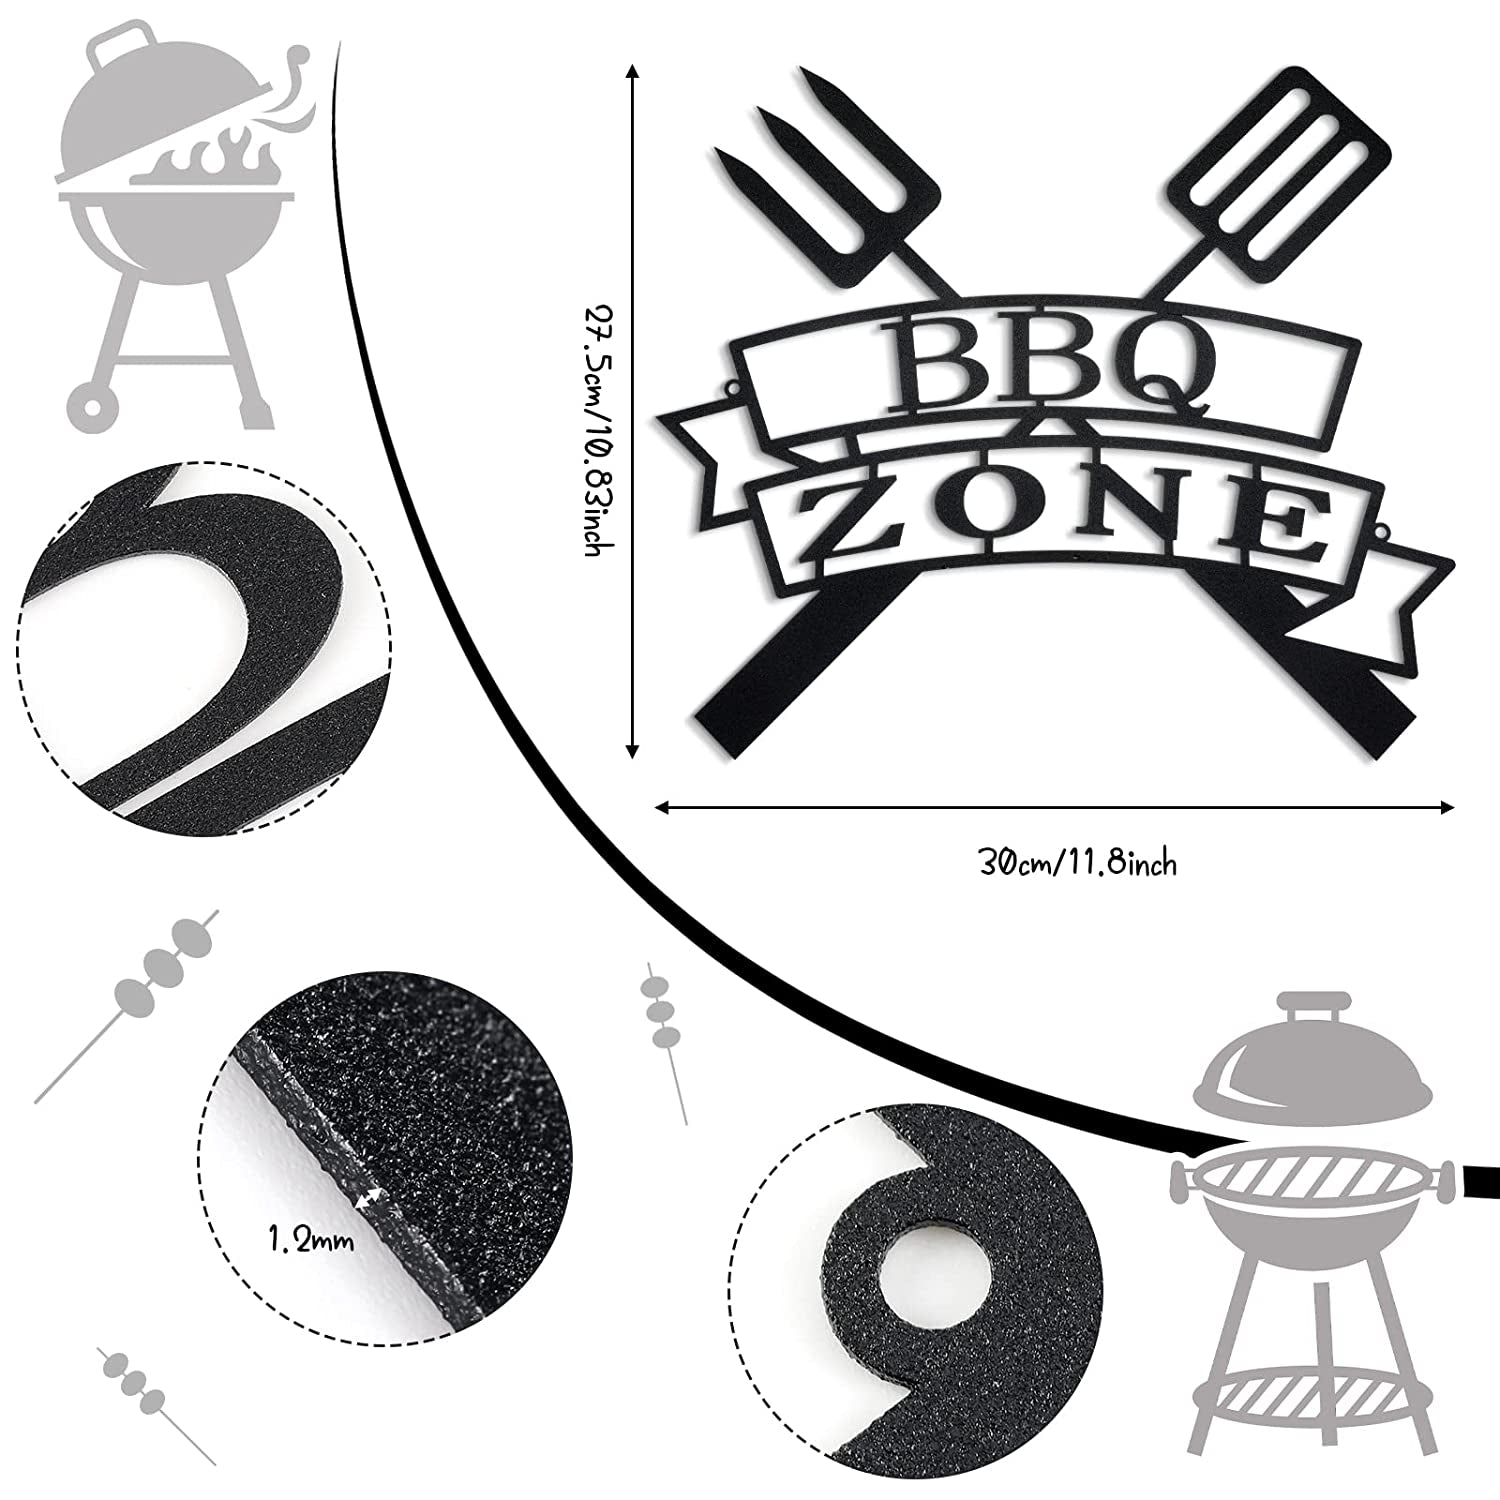 Funrous, Metal BBQ Sign round Grill BBQ Metal Sign Barbecue Monogram Wall Decor BBQ Zone Retro Kitchen Metal Signs Hanging Grill Barbecue Sign for Outdoor Backyard Kitchen Wall Art Decoration (Classic Style)